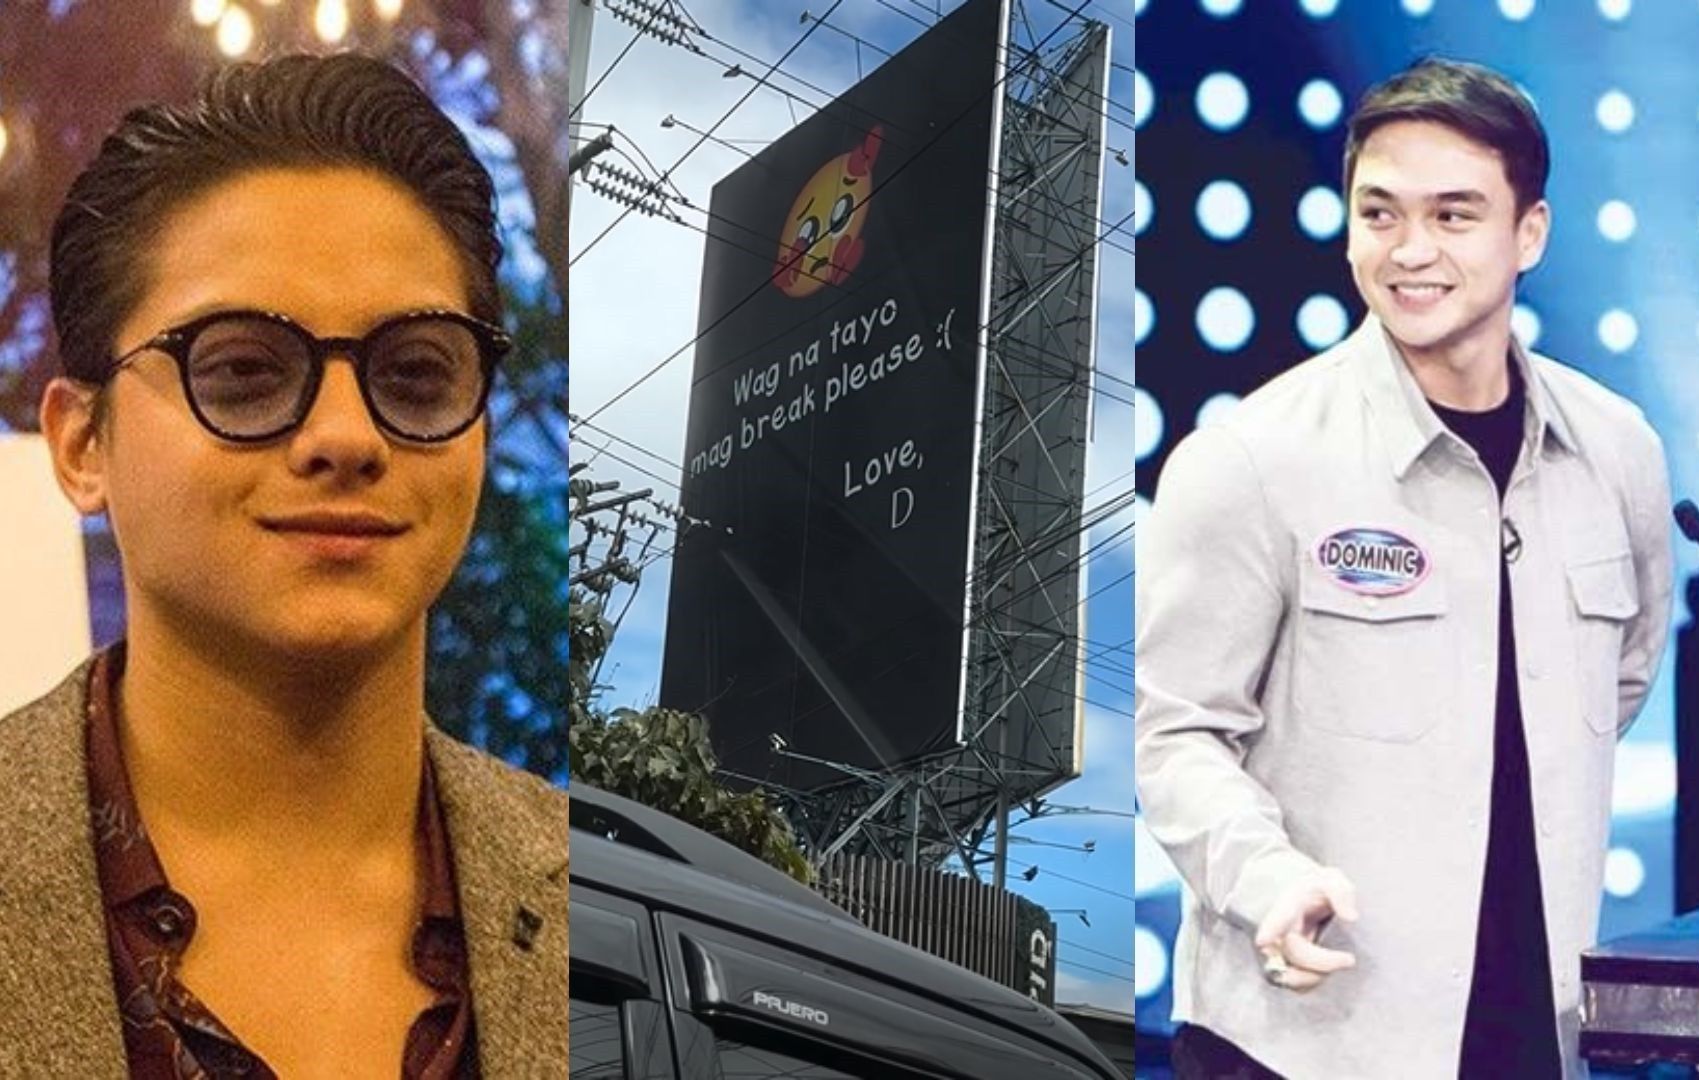 Dominic Roque? Daniel Padilla? Billboard by ‘D’ asking not to break up goes viral